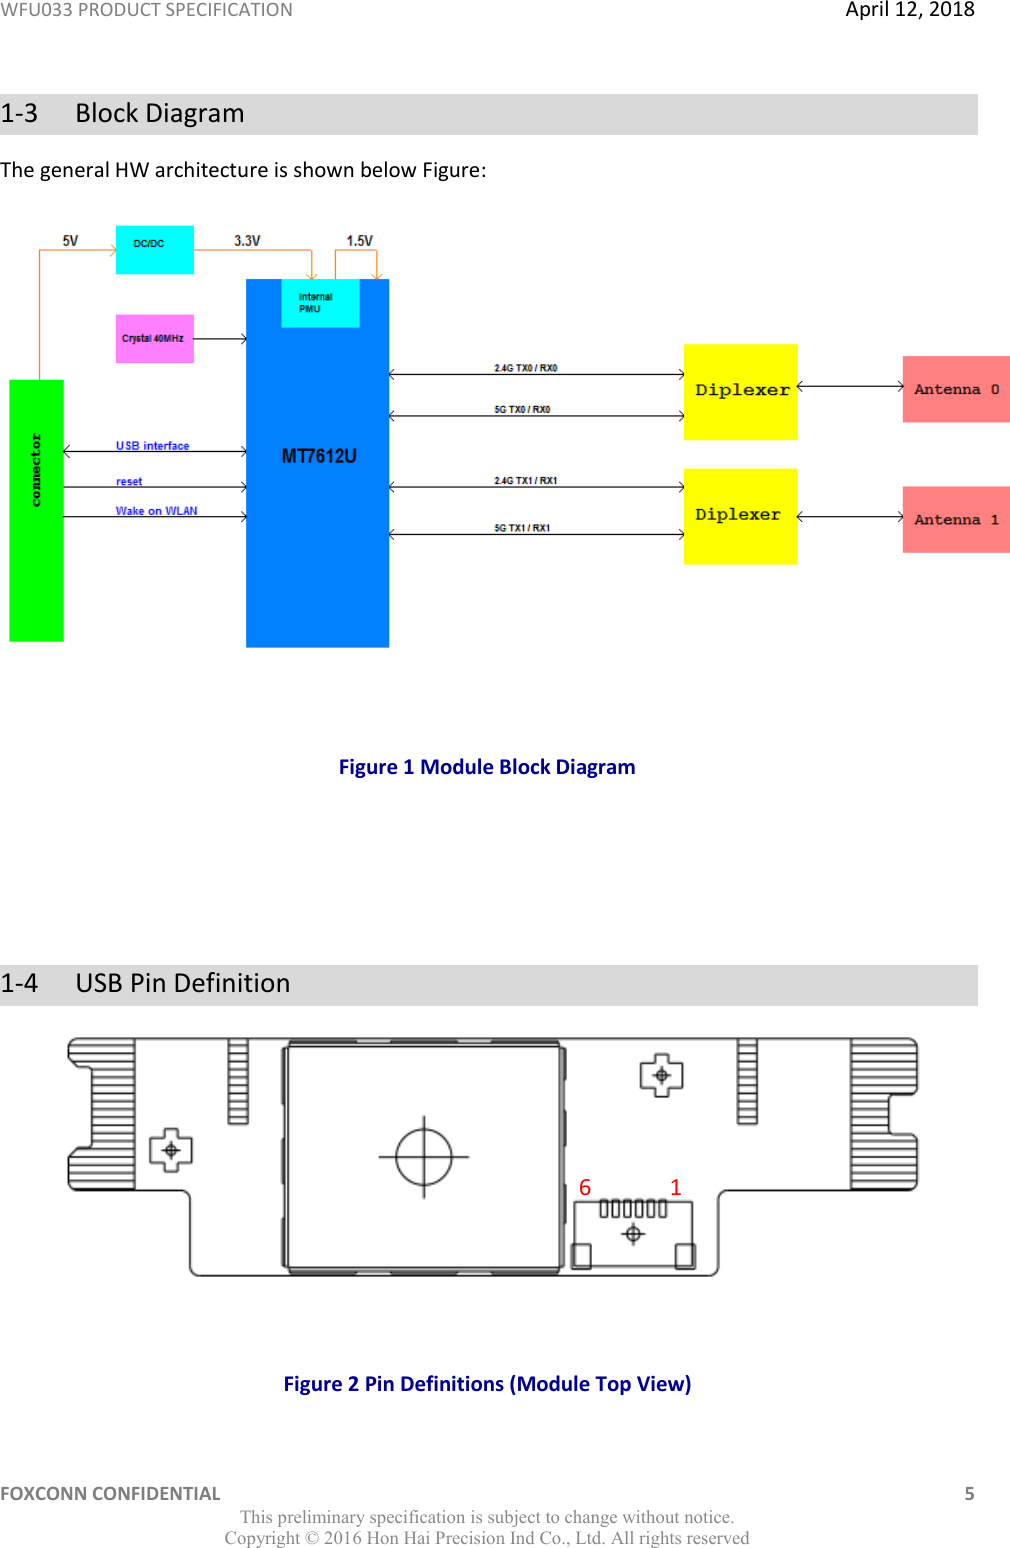 WFU033 PRODUCT SPECIFICATION  April 12, 2018 FOXCONN CONFIDENTIAL    5 This preliminary specification is subject to change without notice. Copyright ©  2016 Hon Hai Precision Ind Co., Ltd. All rights reserved 1-3  Block Diagram The general HW architecture is shown below Figure:    Figure 1 Module Block Diagram    1-4 USB Pin Definition   Figure 2 Pin Definitions (Module Top View) 1 6 